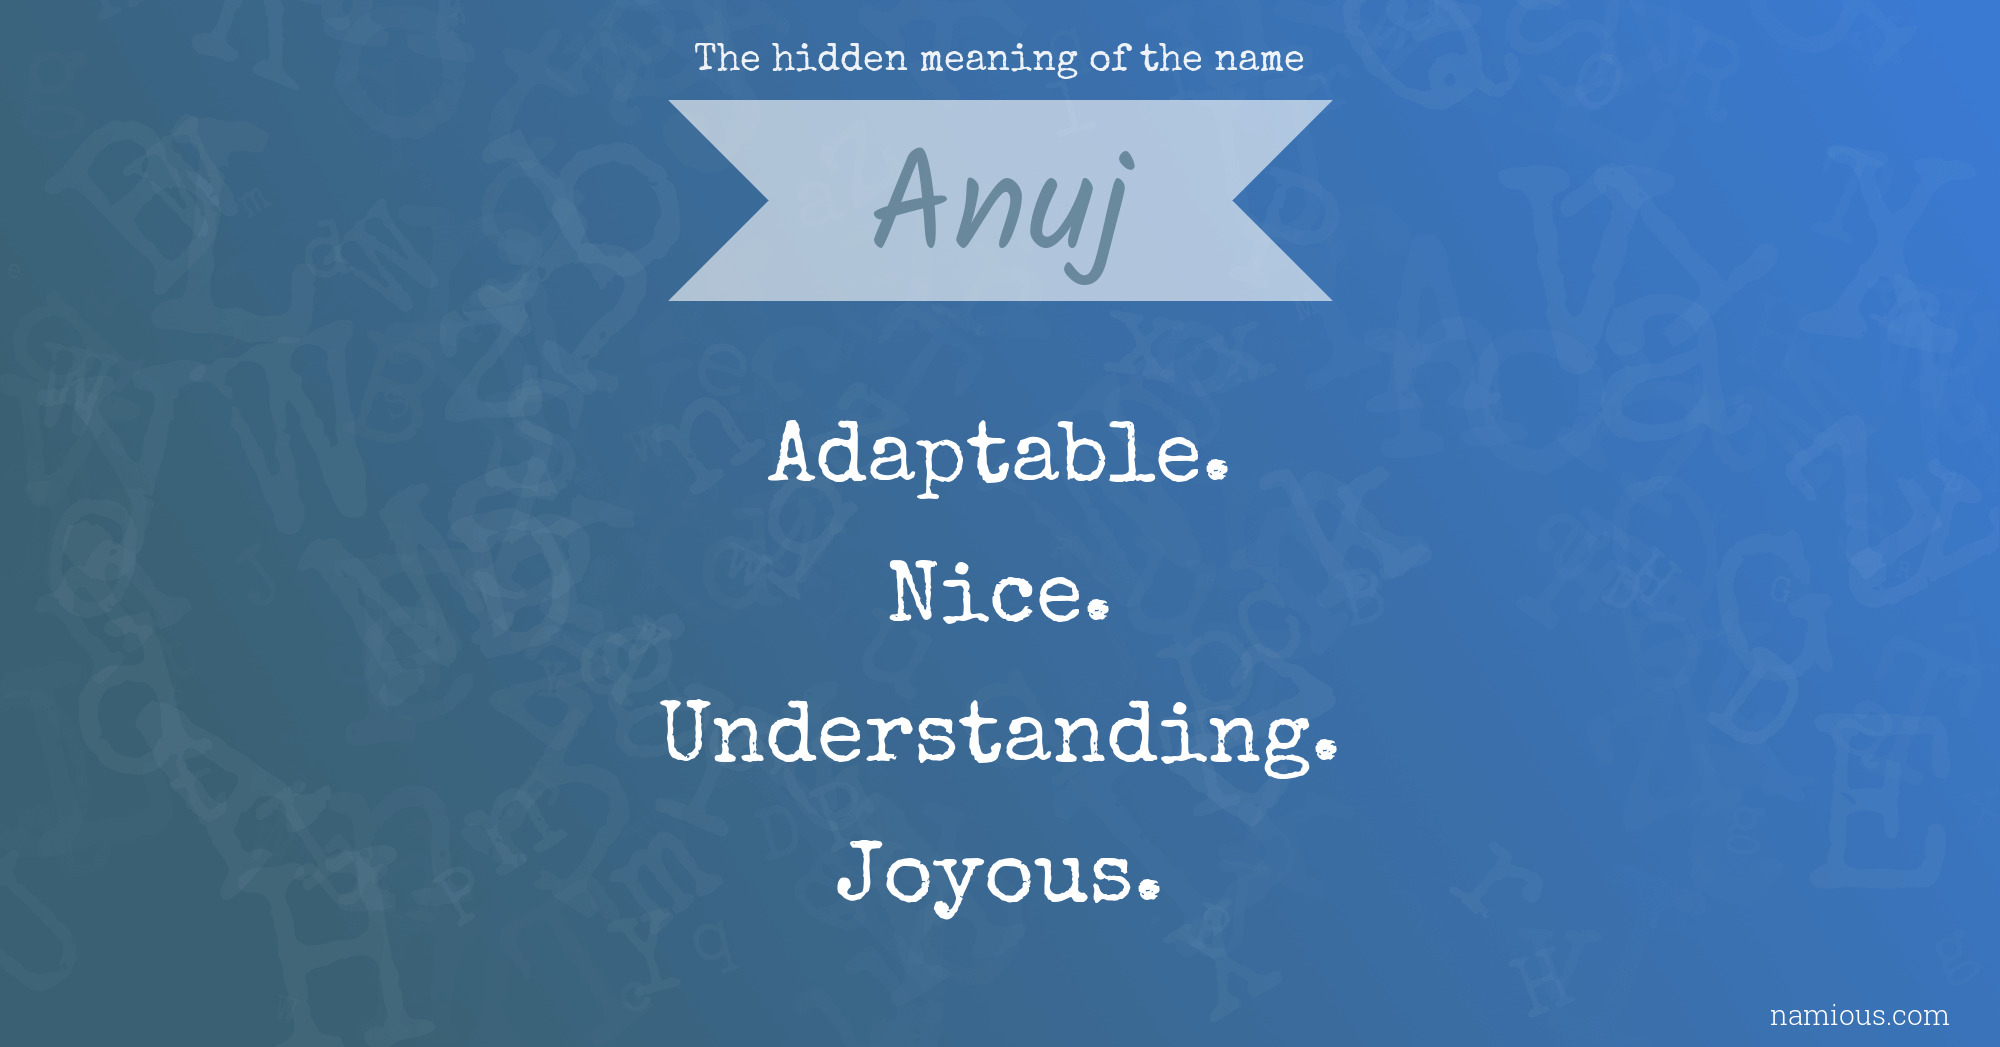 The hidden meaning of the name Anuj